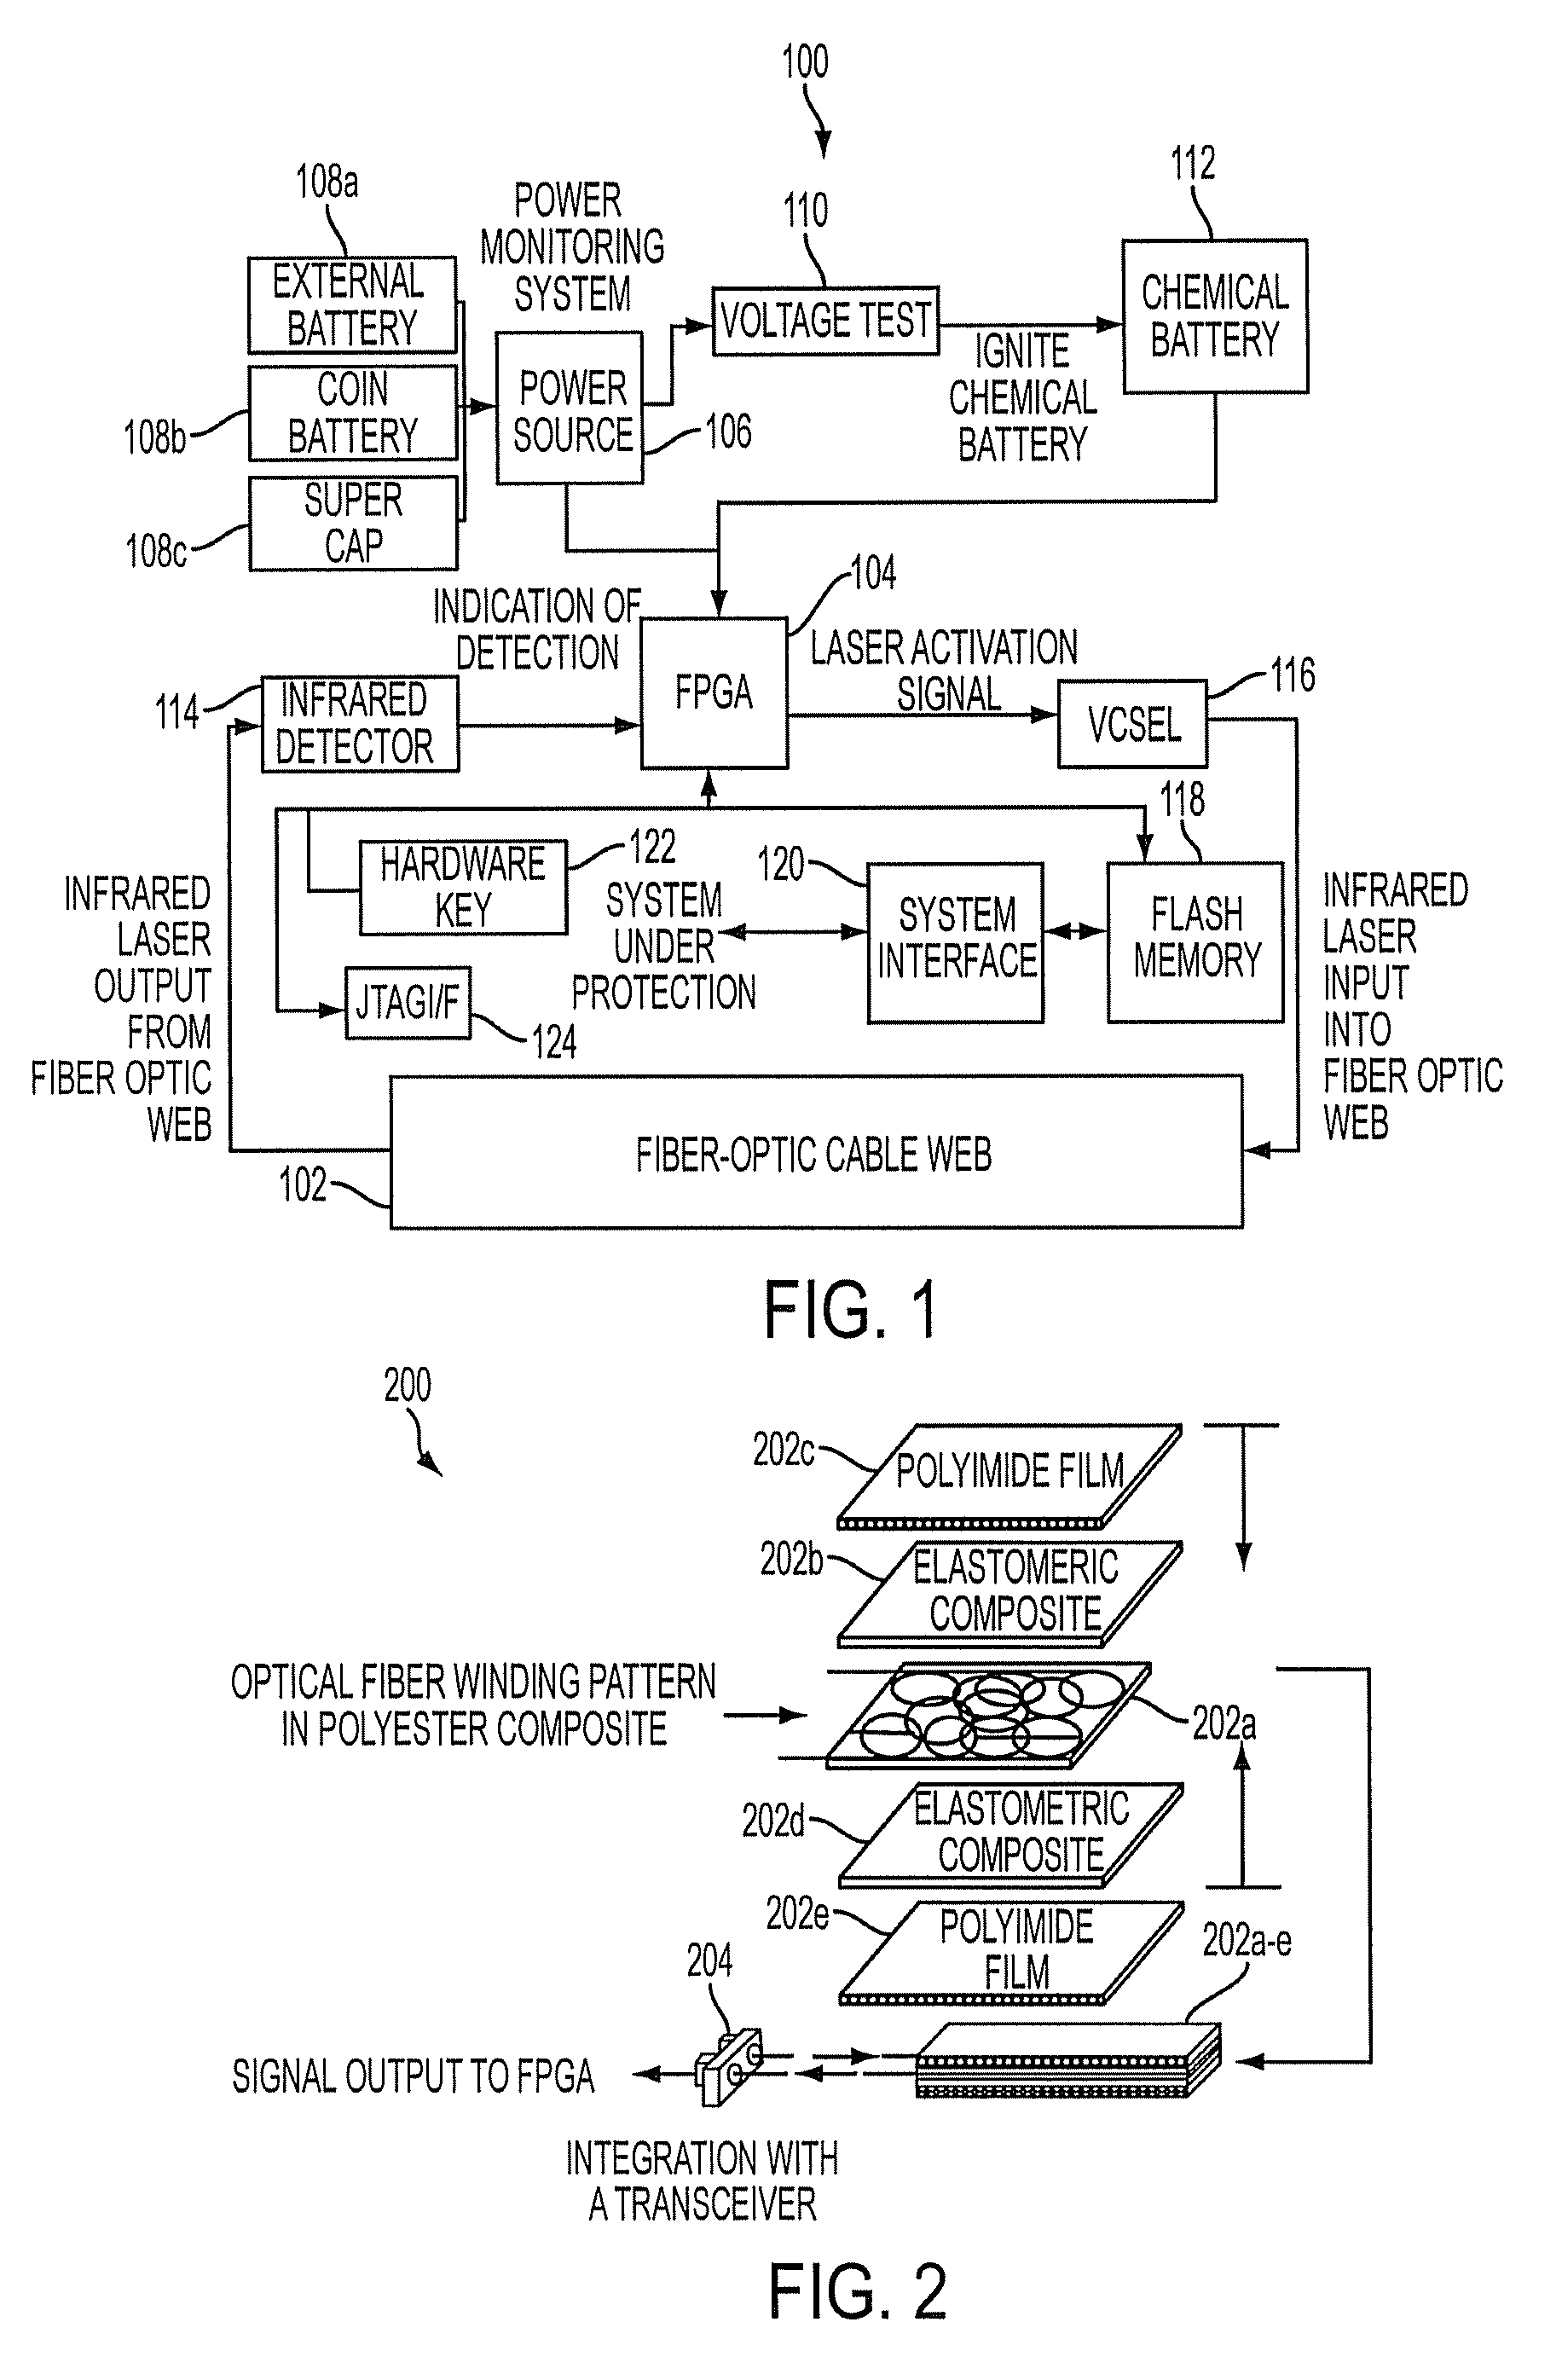 System and method for detecting unauthorized access to electronic equipment or components